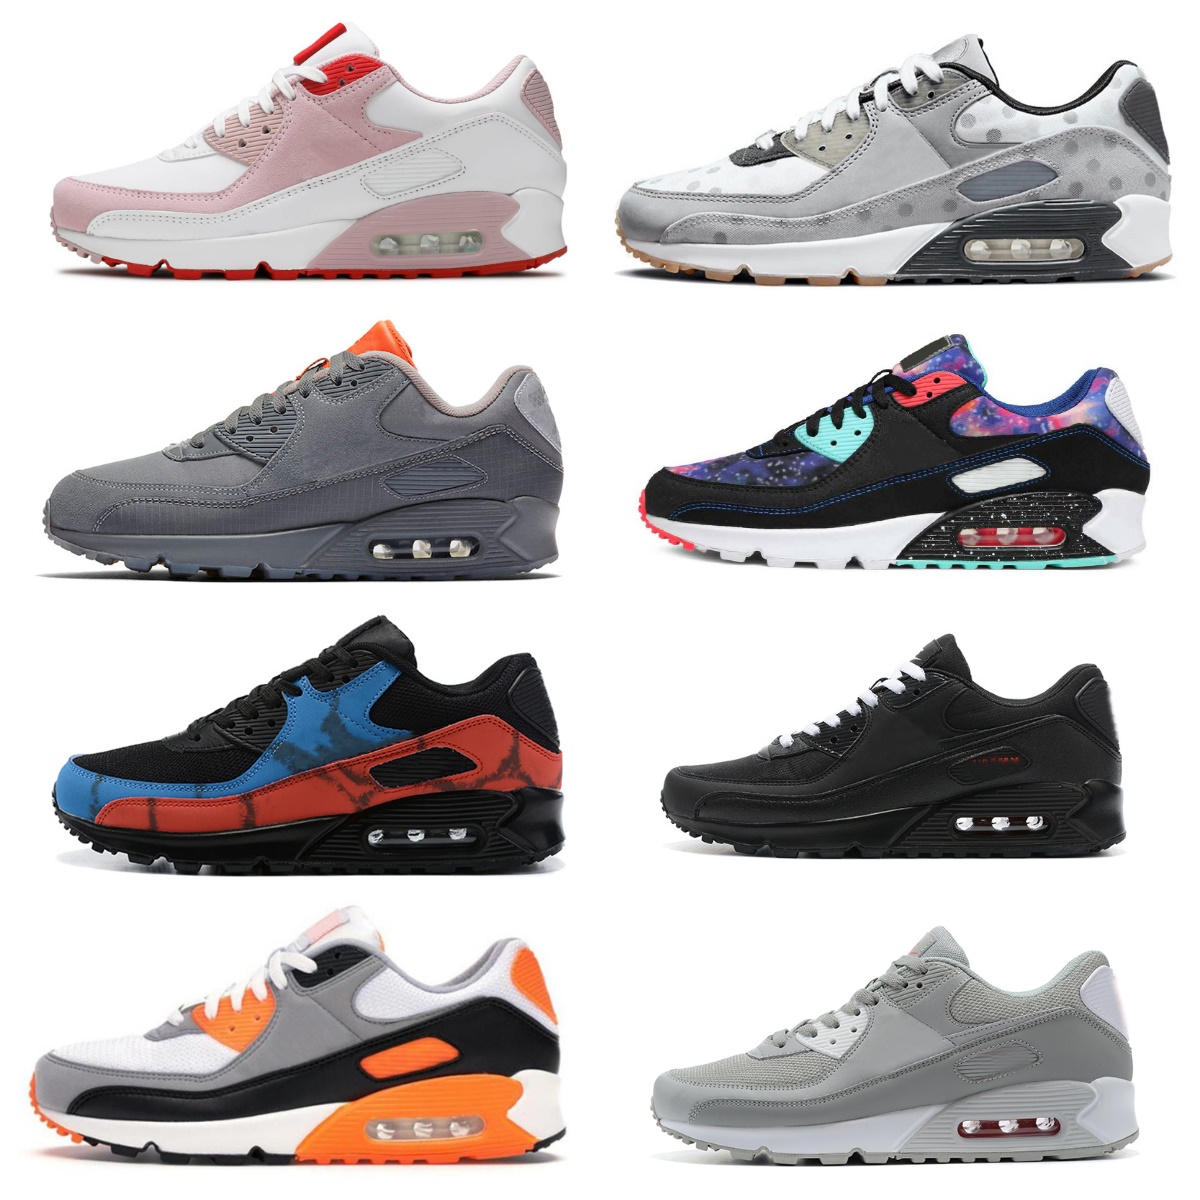 

Classic 90 Casual Shoes air90 Recraft Hyper Grape Valentines Day Supernova White Black Sport Red Wolf Grey Total Orange air 90s Obsidian Laser Blue trainers Sneakers, Bubble package bag